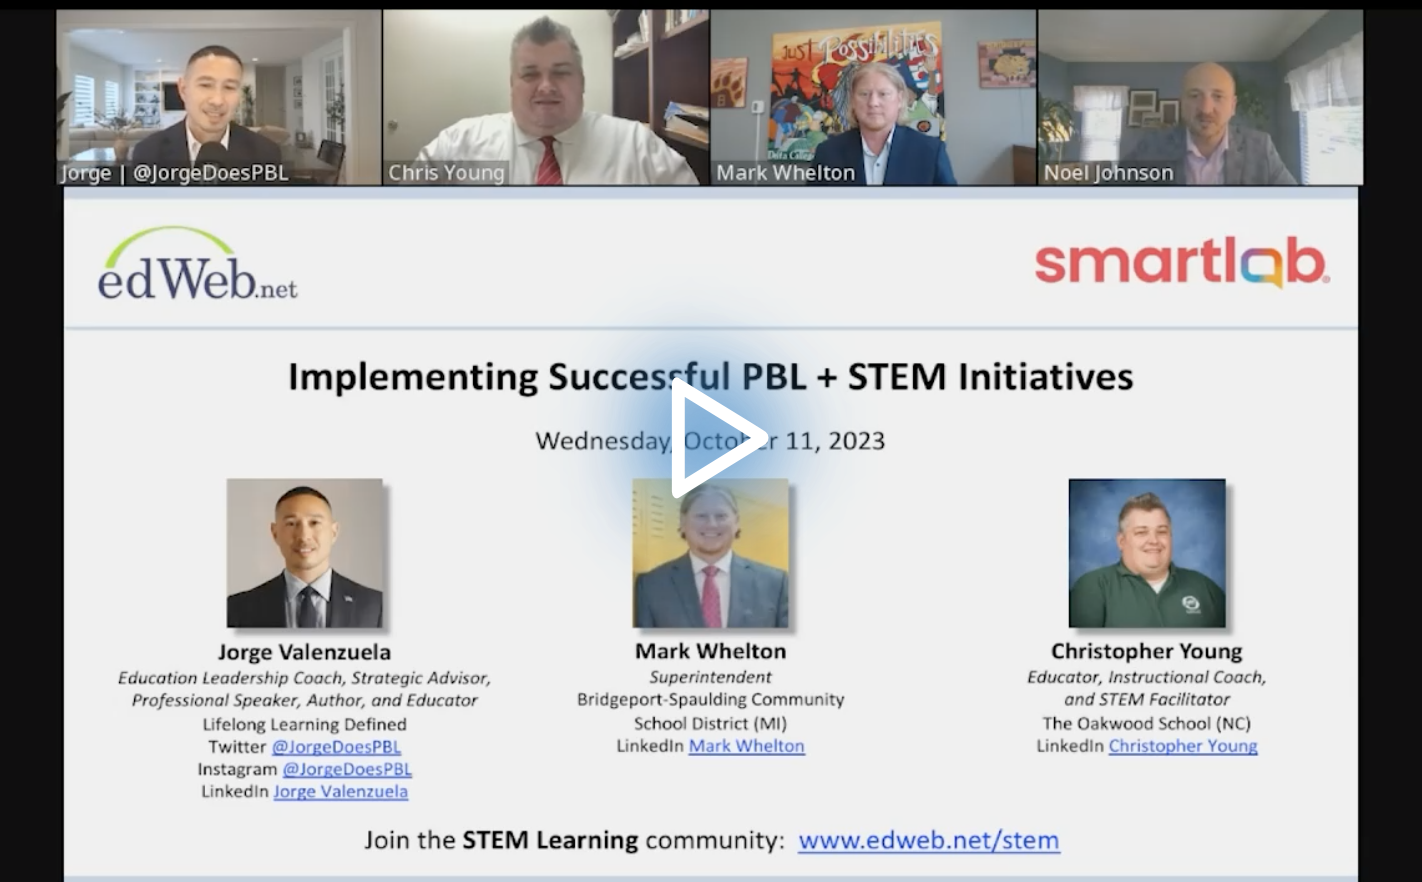 Implementing Successful PBL + STEM Initiatives edLeader Panel recording image